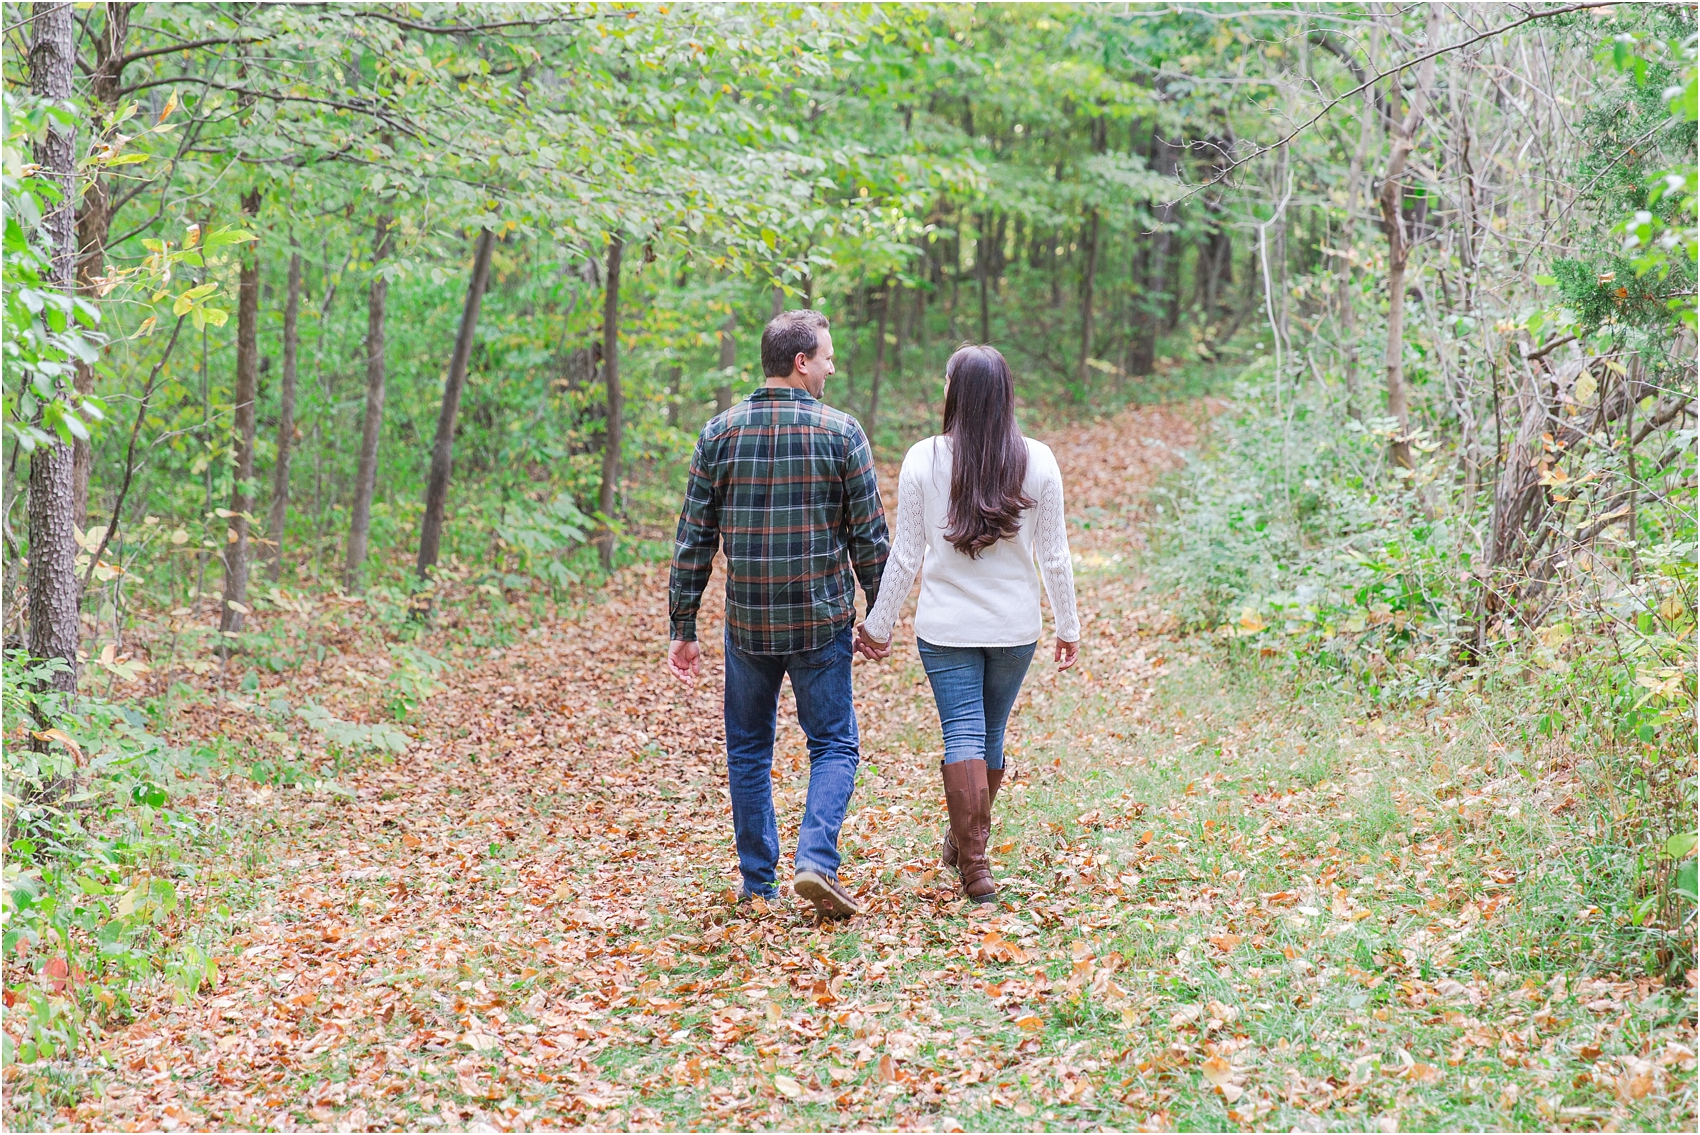 relaxed-autumn-engagement-photos-at-hudson-mills-metropark-in-dexter-mi-by-courtney-carolyn-photography_0005.jpg